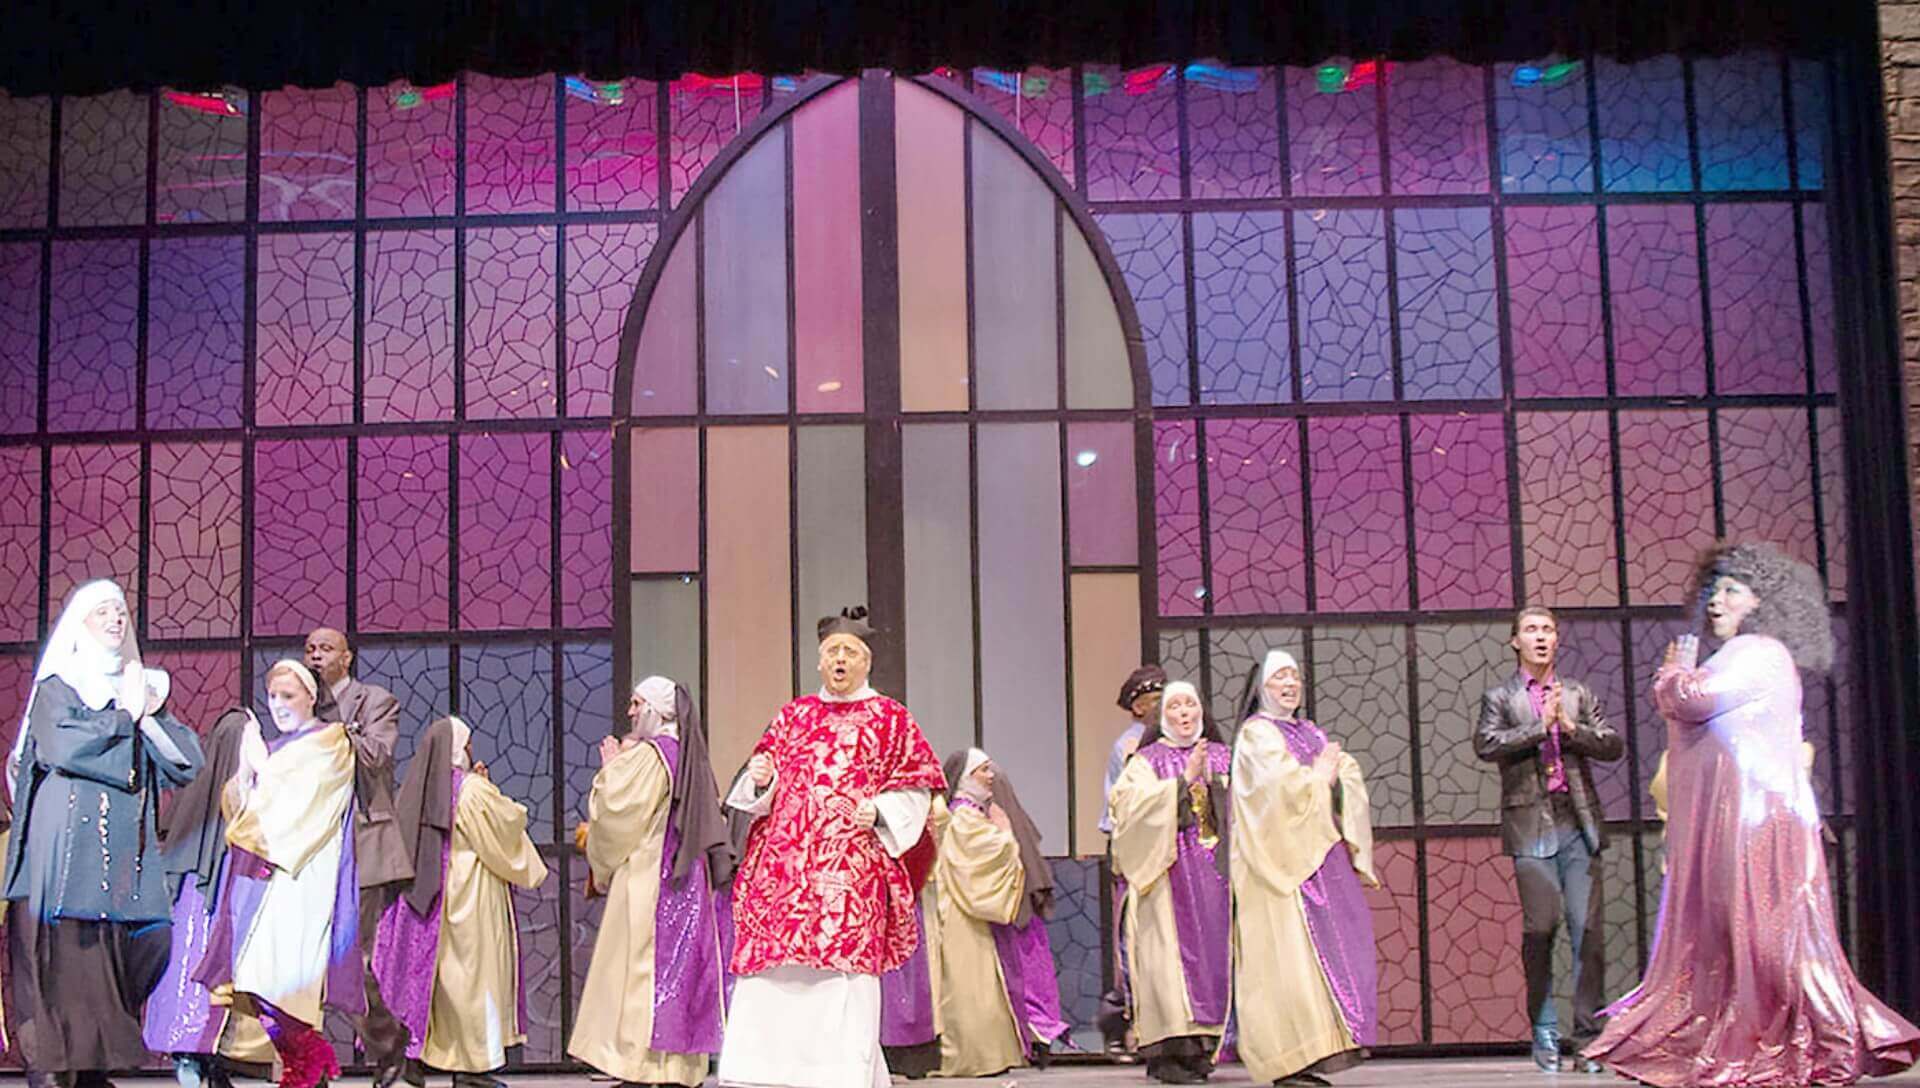 Deloris' Finale costume - Sister Act Costume Rental pictures - Stagecraft Theatrical